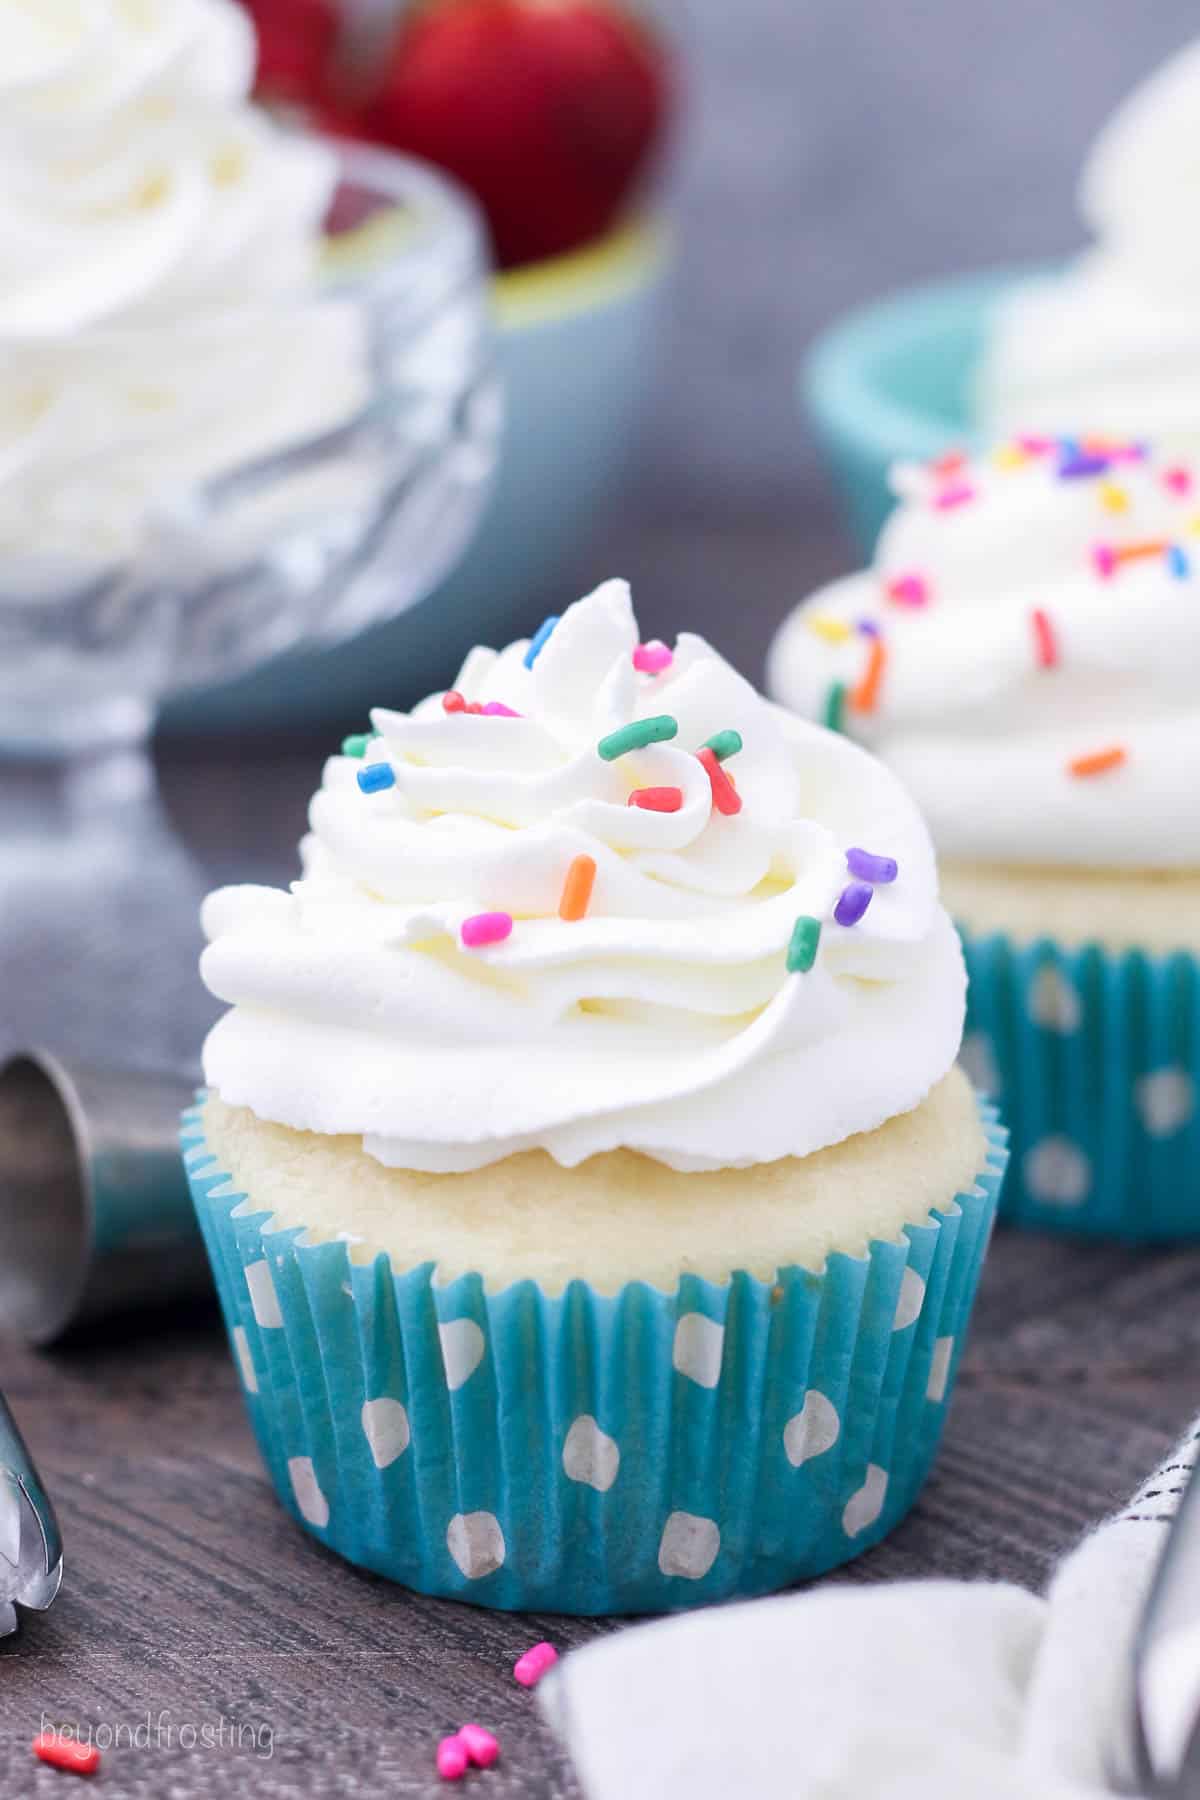 A cupcake topped with piped whipped cream and colored sprinkles.